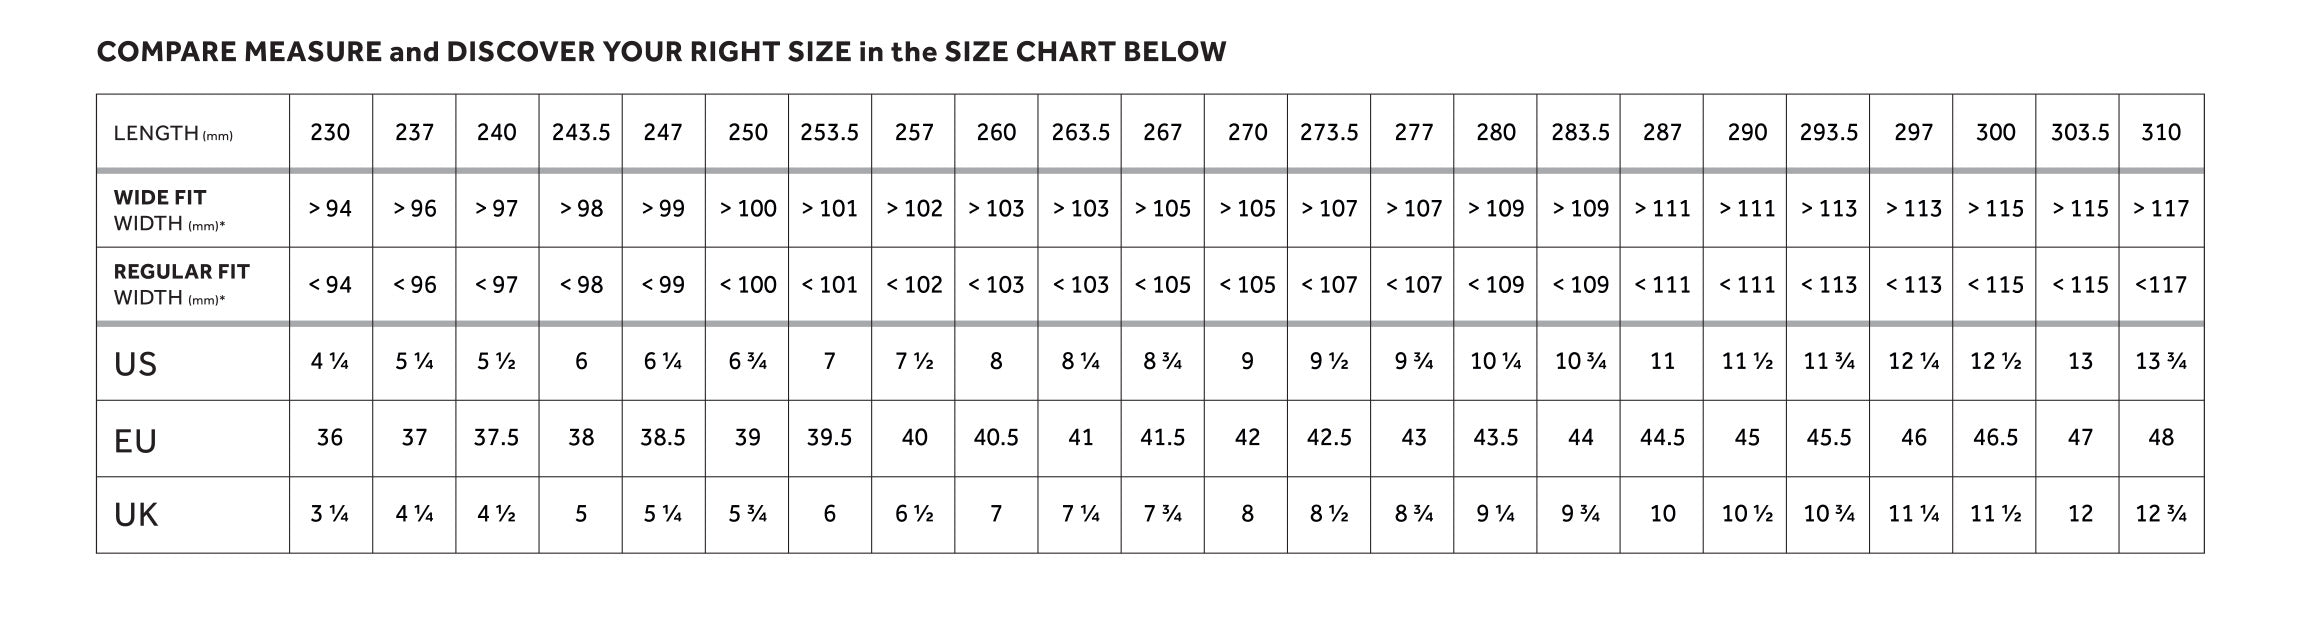 Sizing Guide - please contact Ride guides for assistance